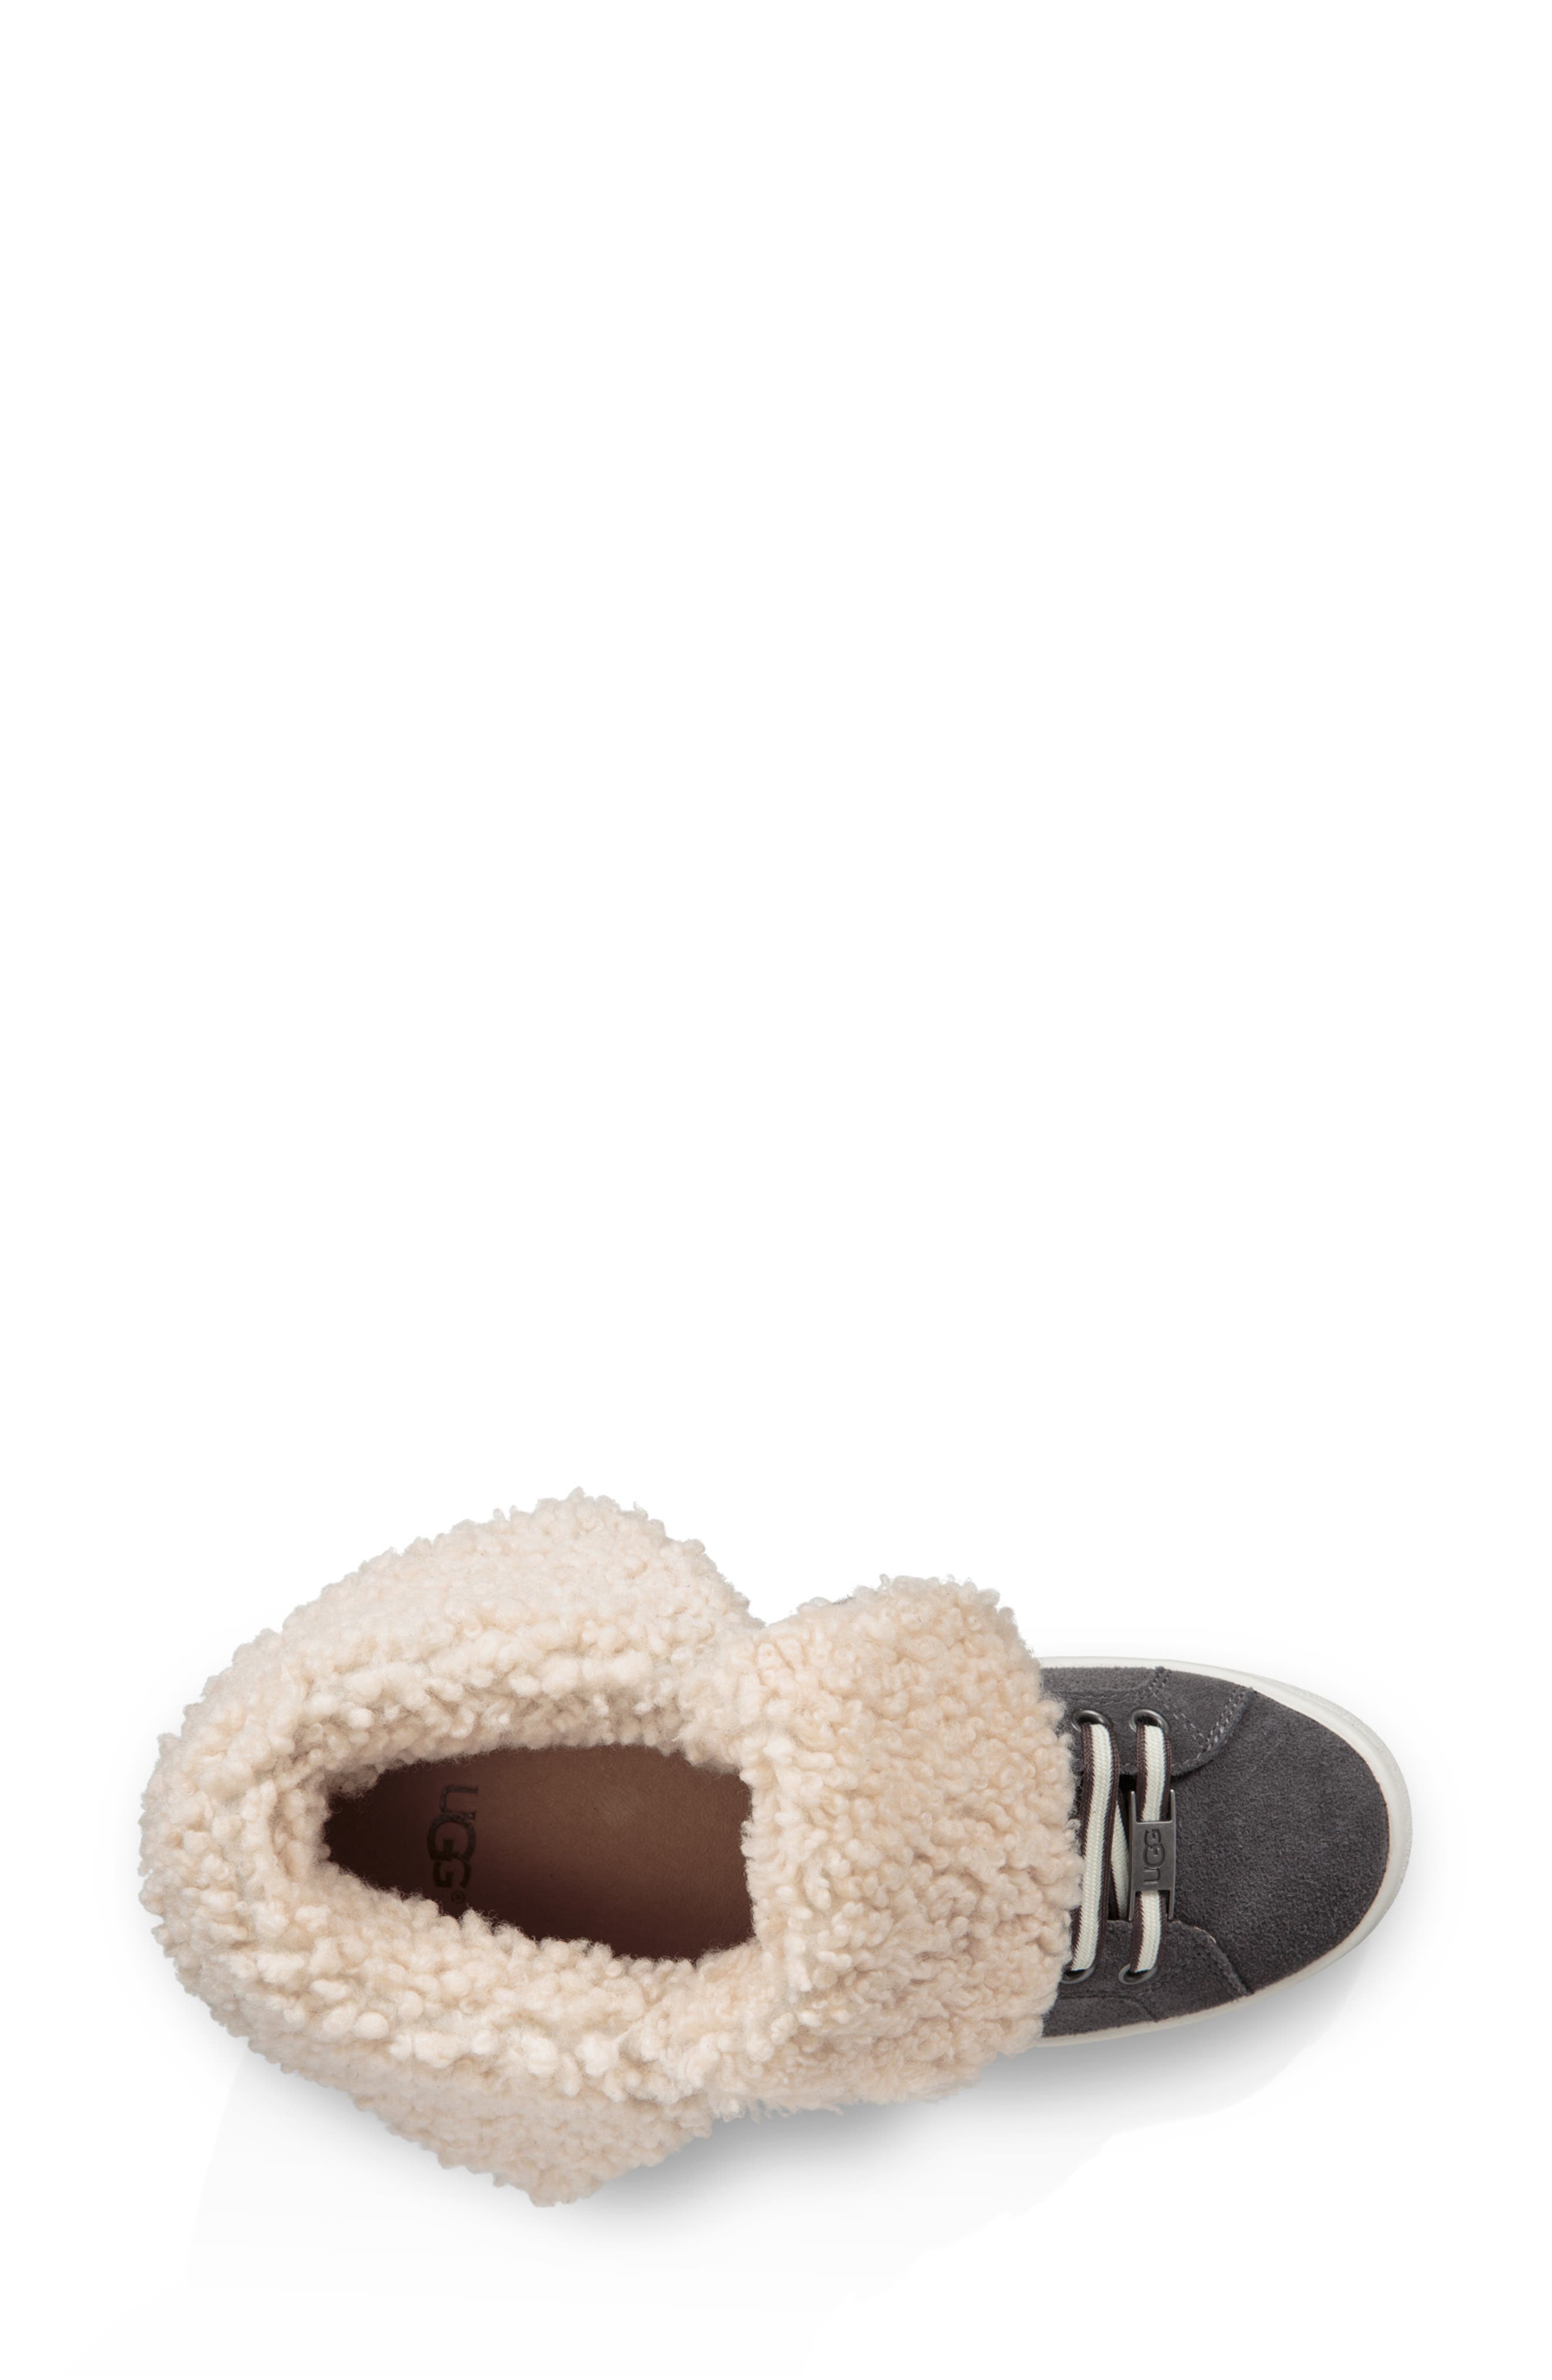 ugg starlyn genuine shearling lined boot